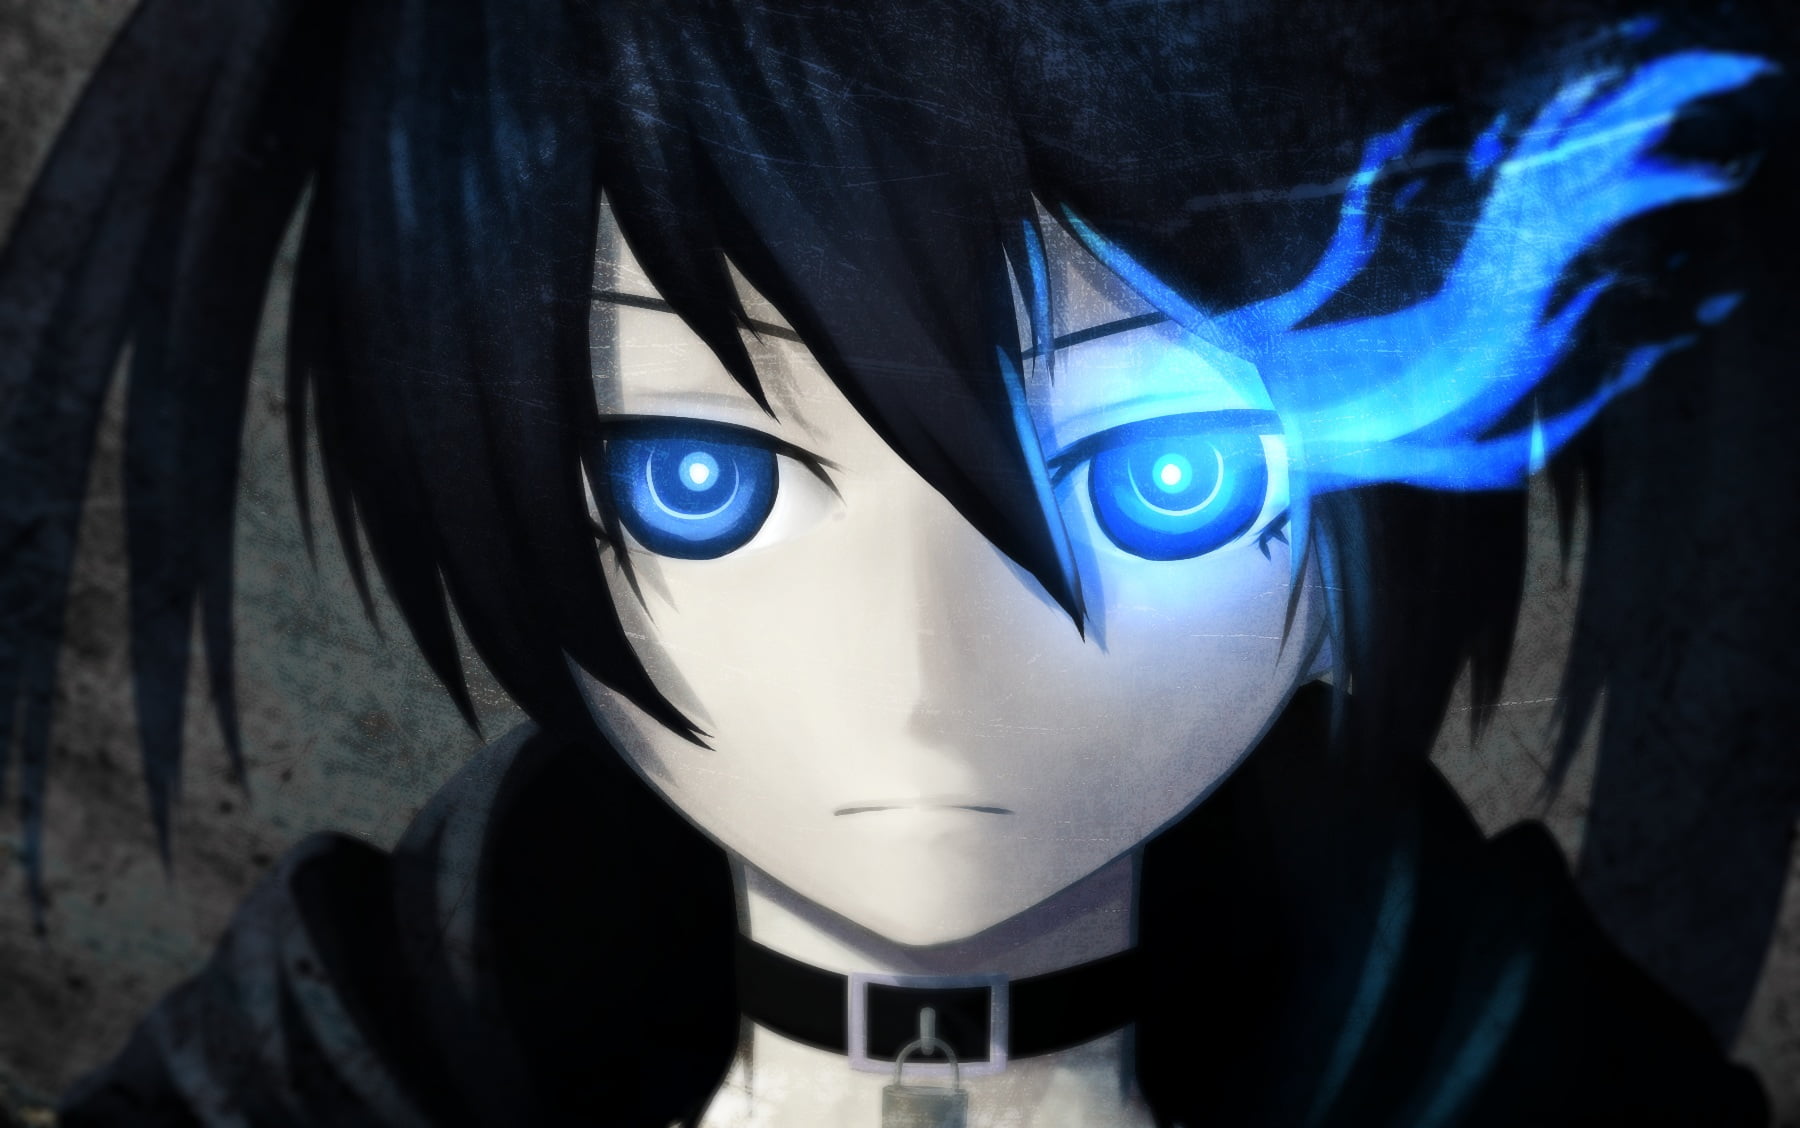 Anime Chibi with Blue Eyes and Dark Hair - wide 1